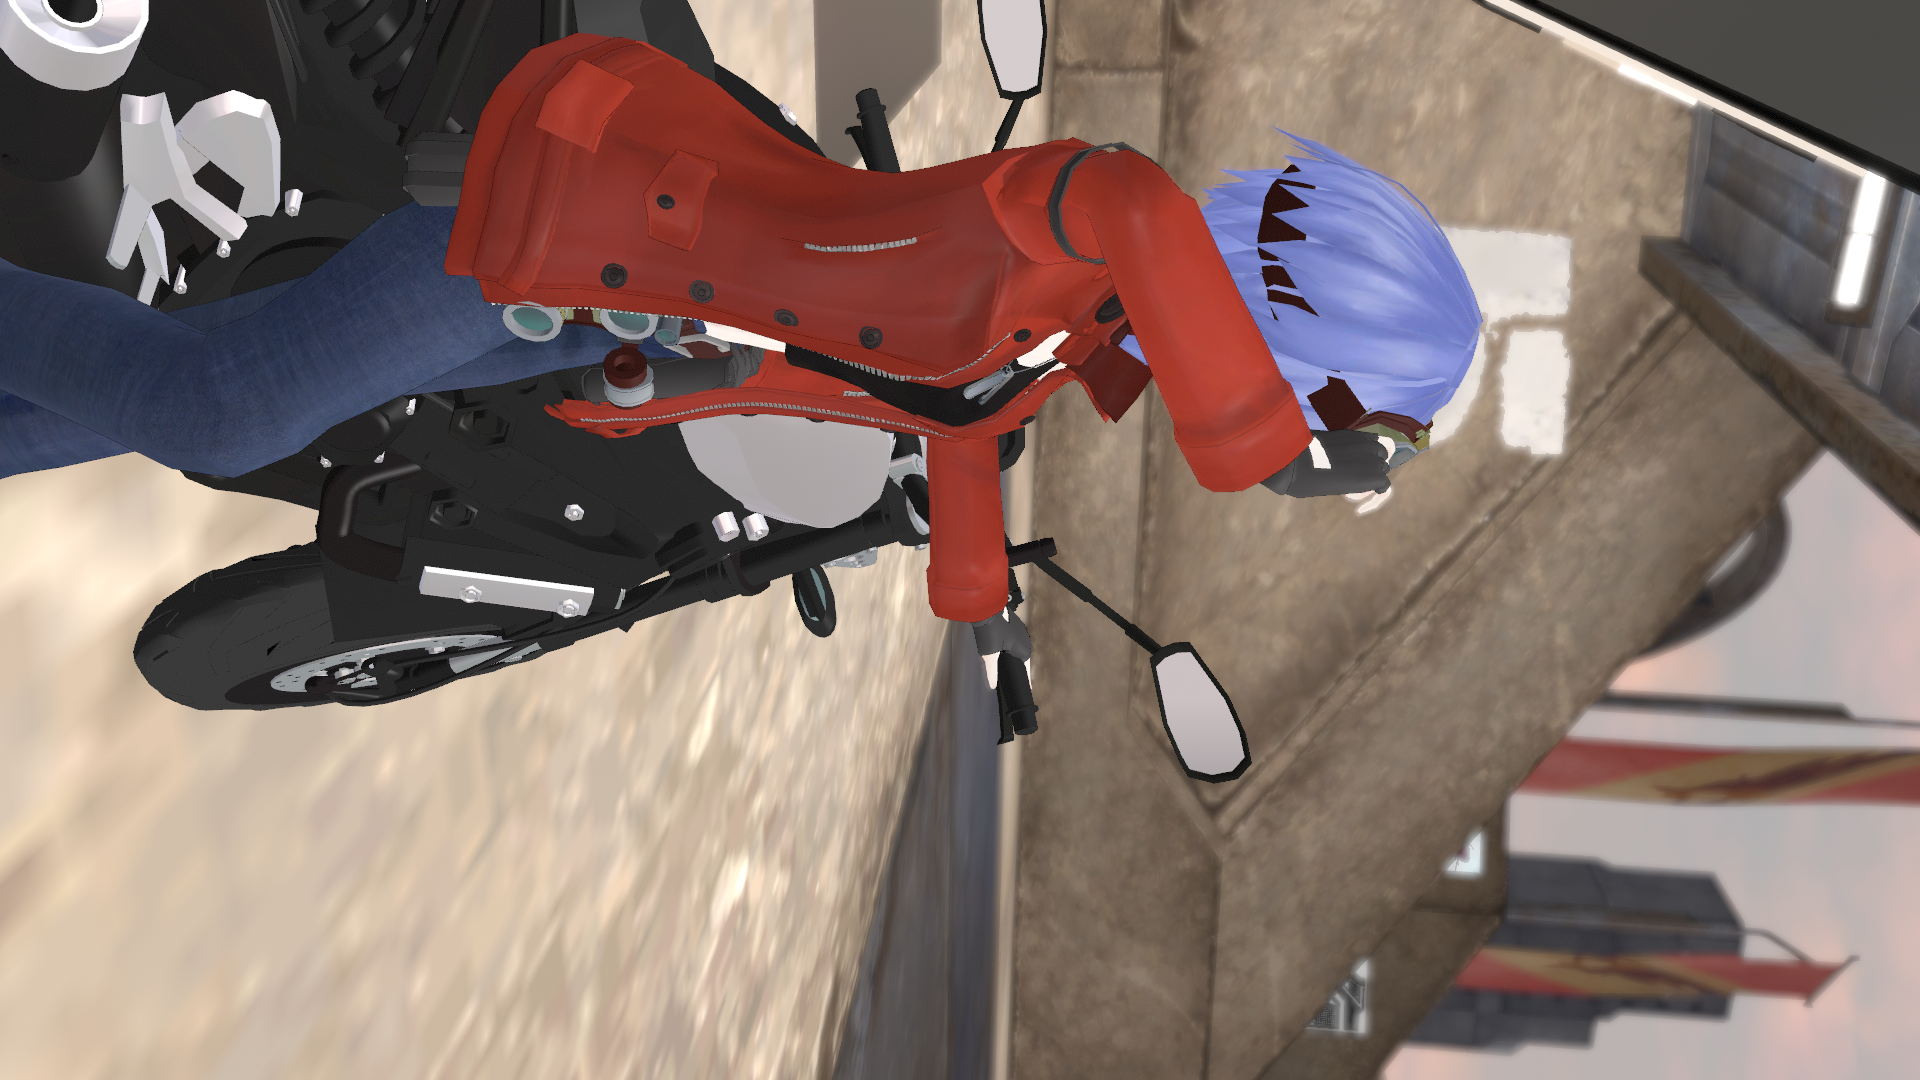 VRChat_1920x1080_2021-12-05_04-26-47.684.png